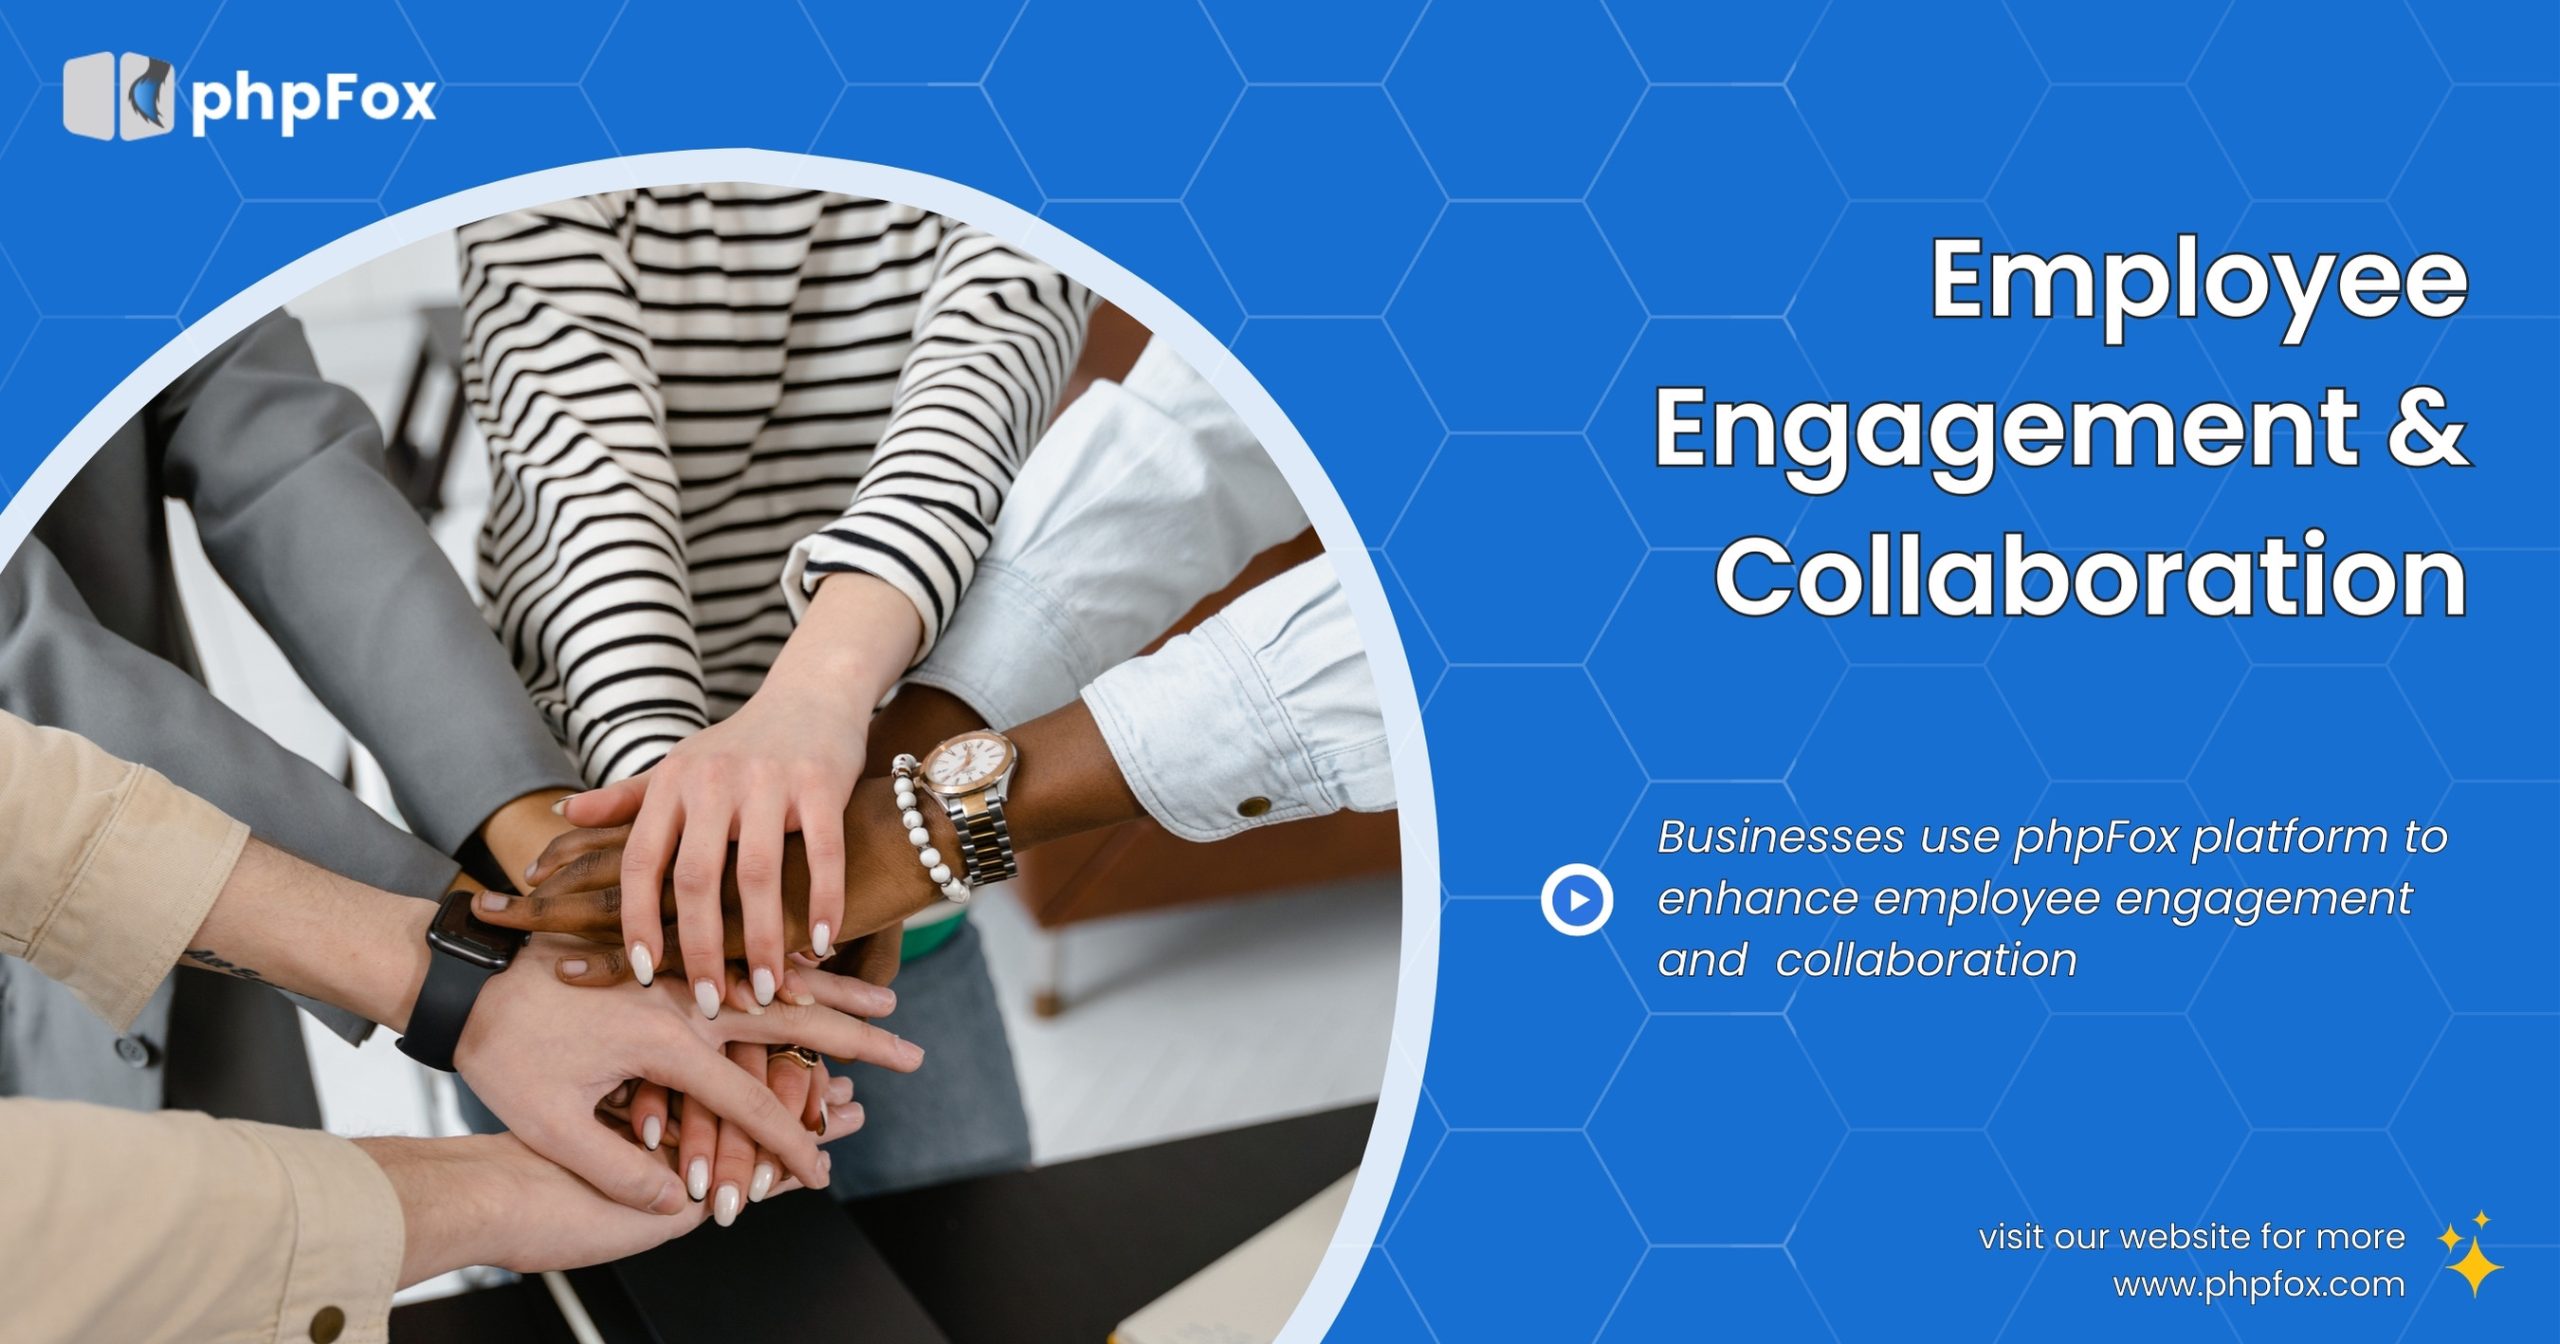 Empowering Workplace Connectivity: Fostering Employee Engagement and Collaboration